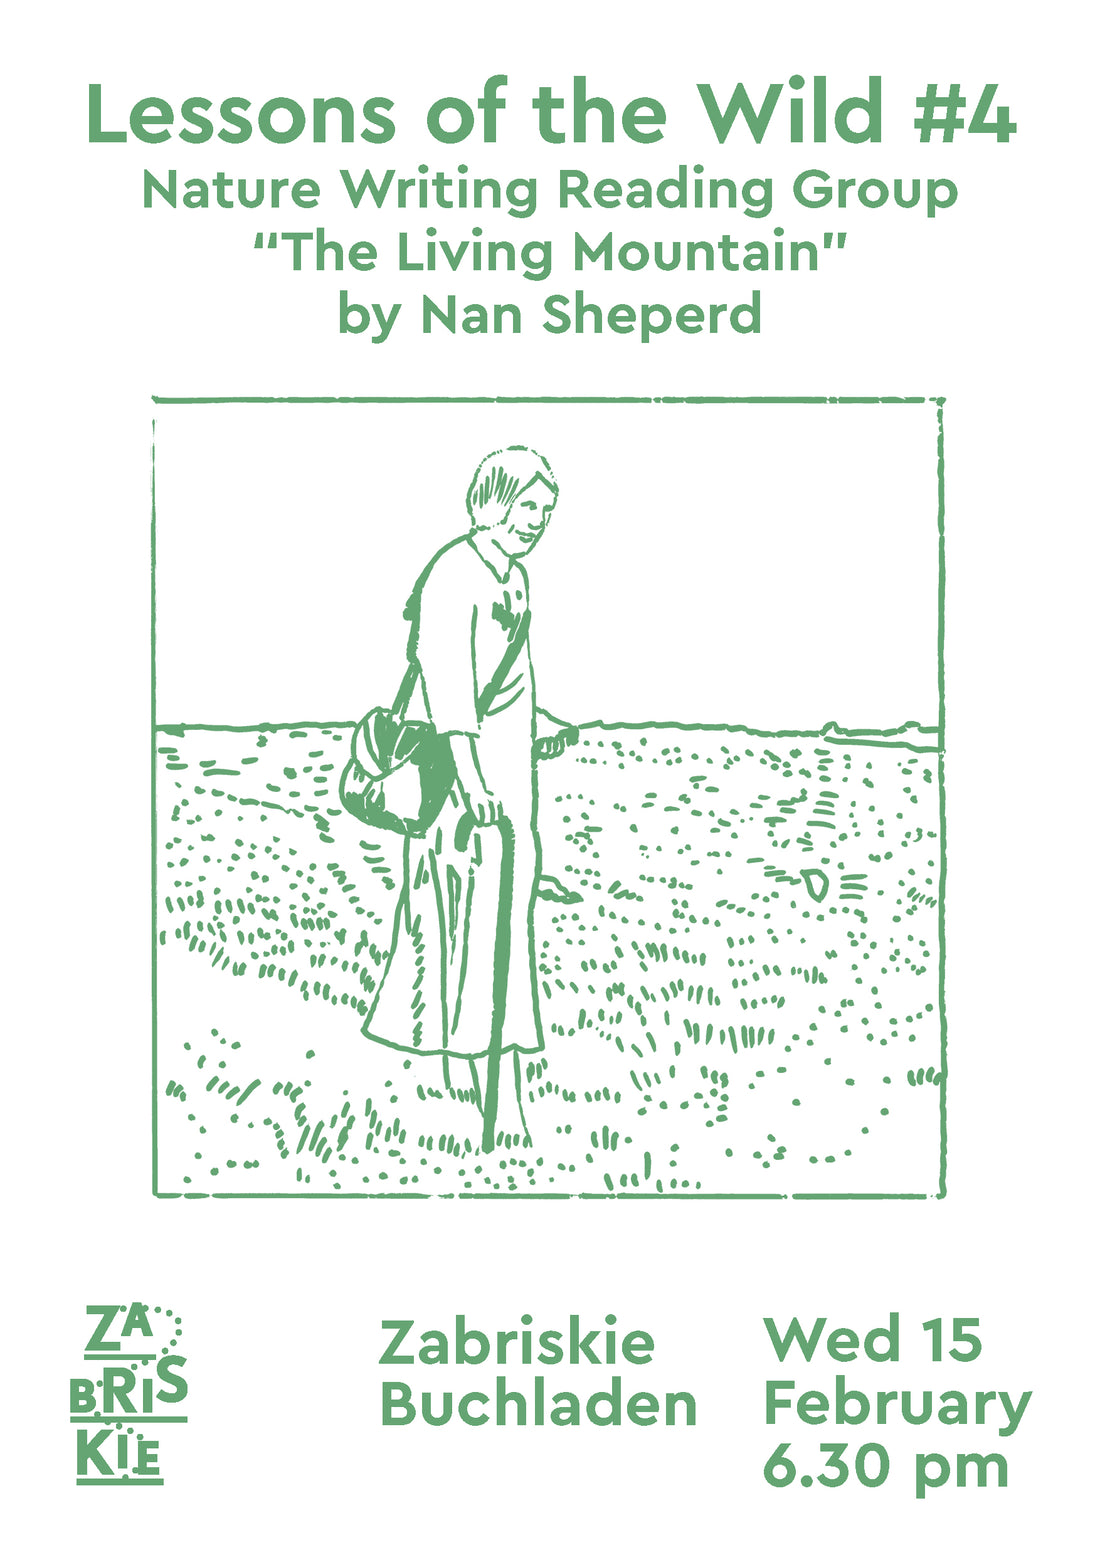 Lessons of the Wild #4. Nature Writing Reading Group. “The Living Mountain” by Nan Shepherd